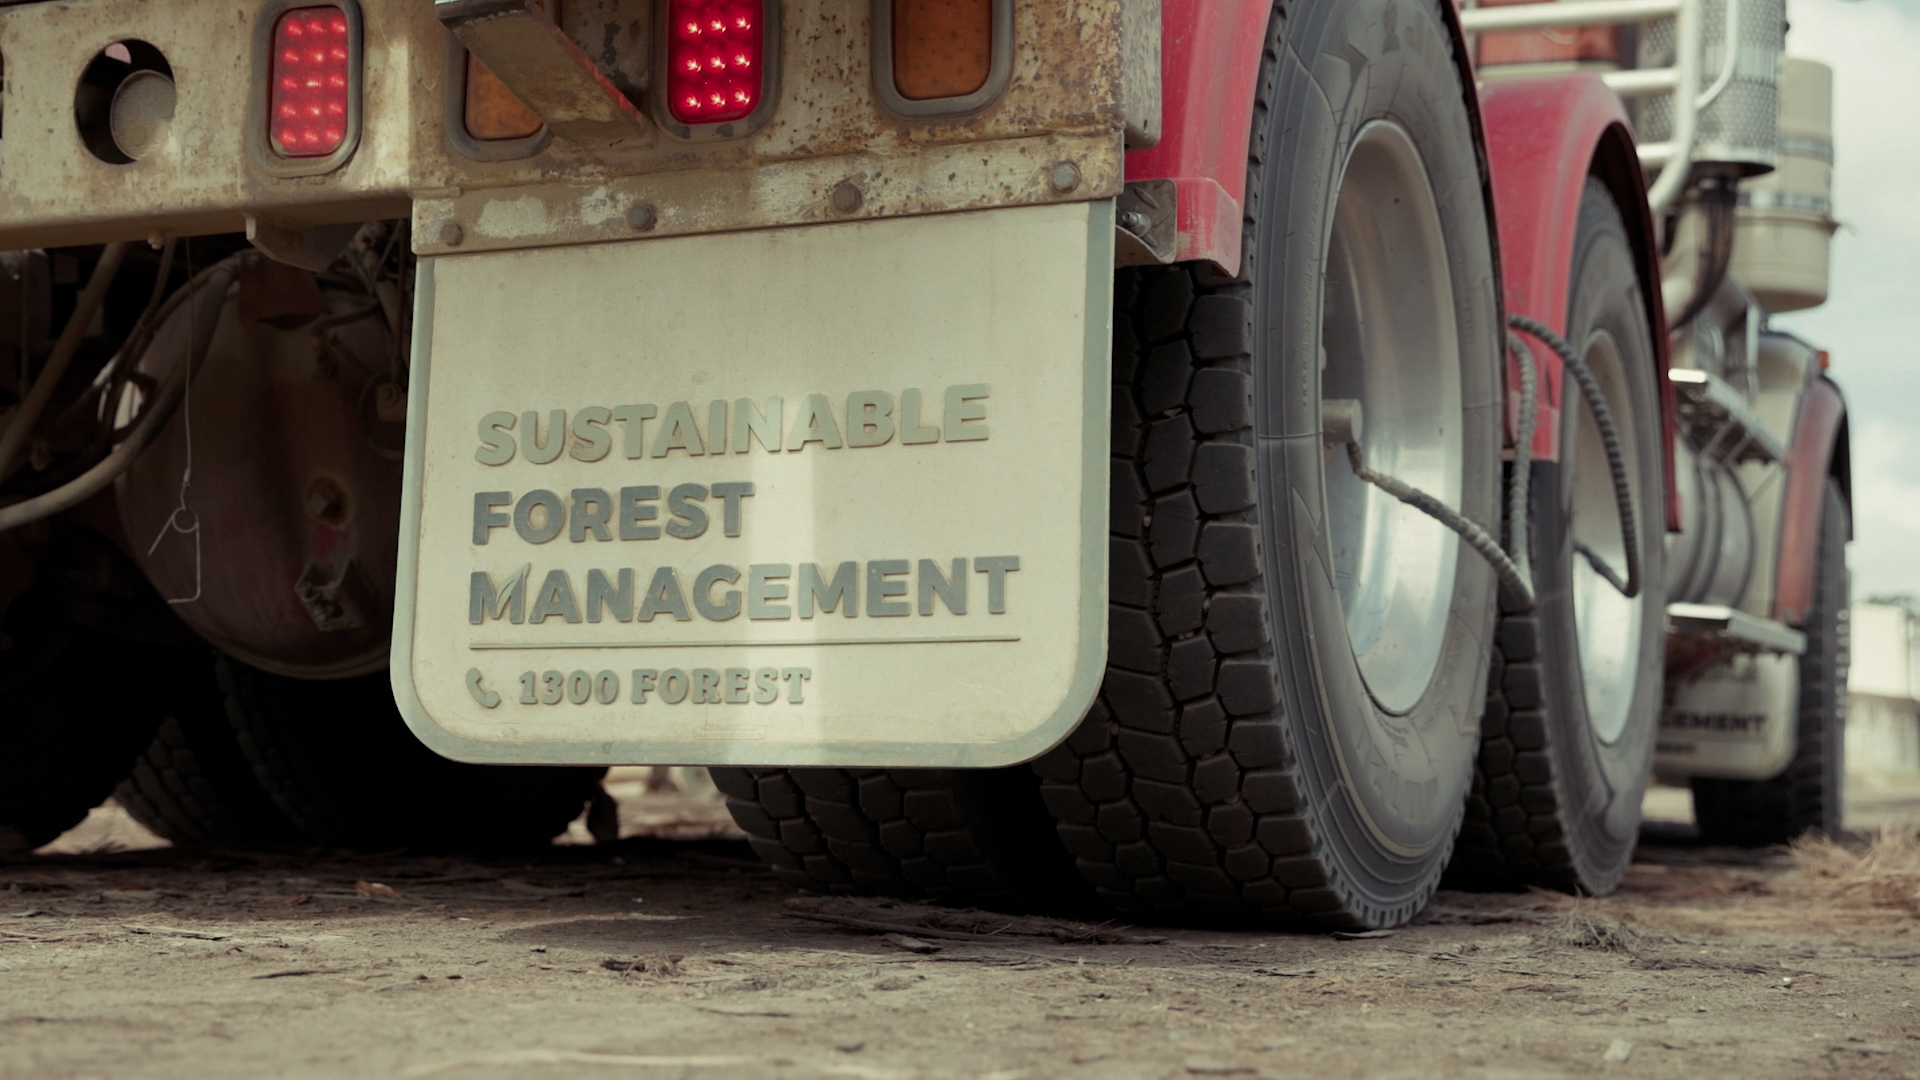 Sustainable Forest Management includes planning the operational logistics including haulage costs and transportation